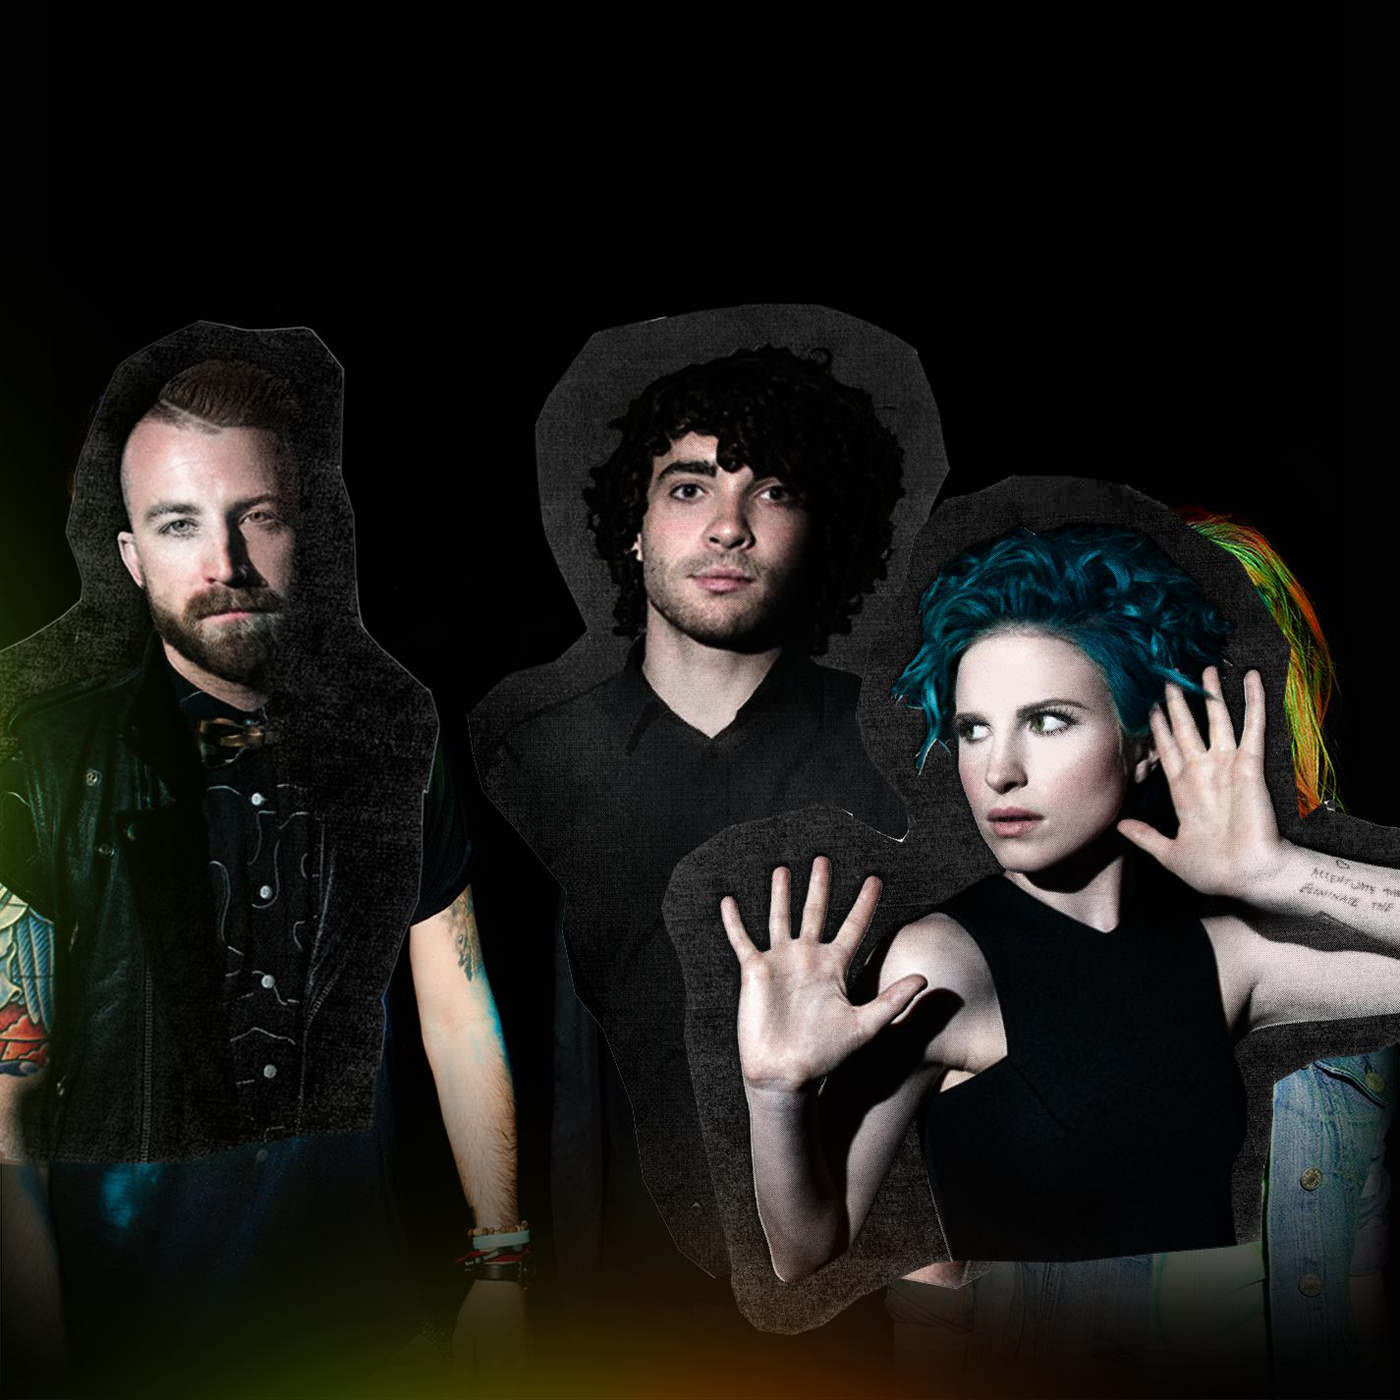 Paramore - Paramore: Self-Titled Deluxe (2014) [Qobuz FLAC 24bit/44,1kHz]